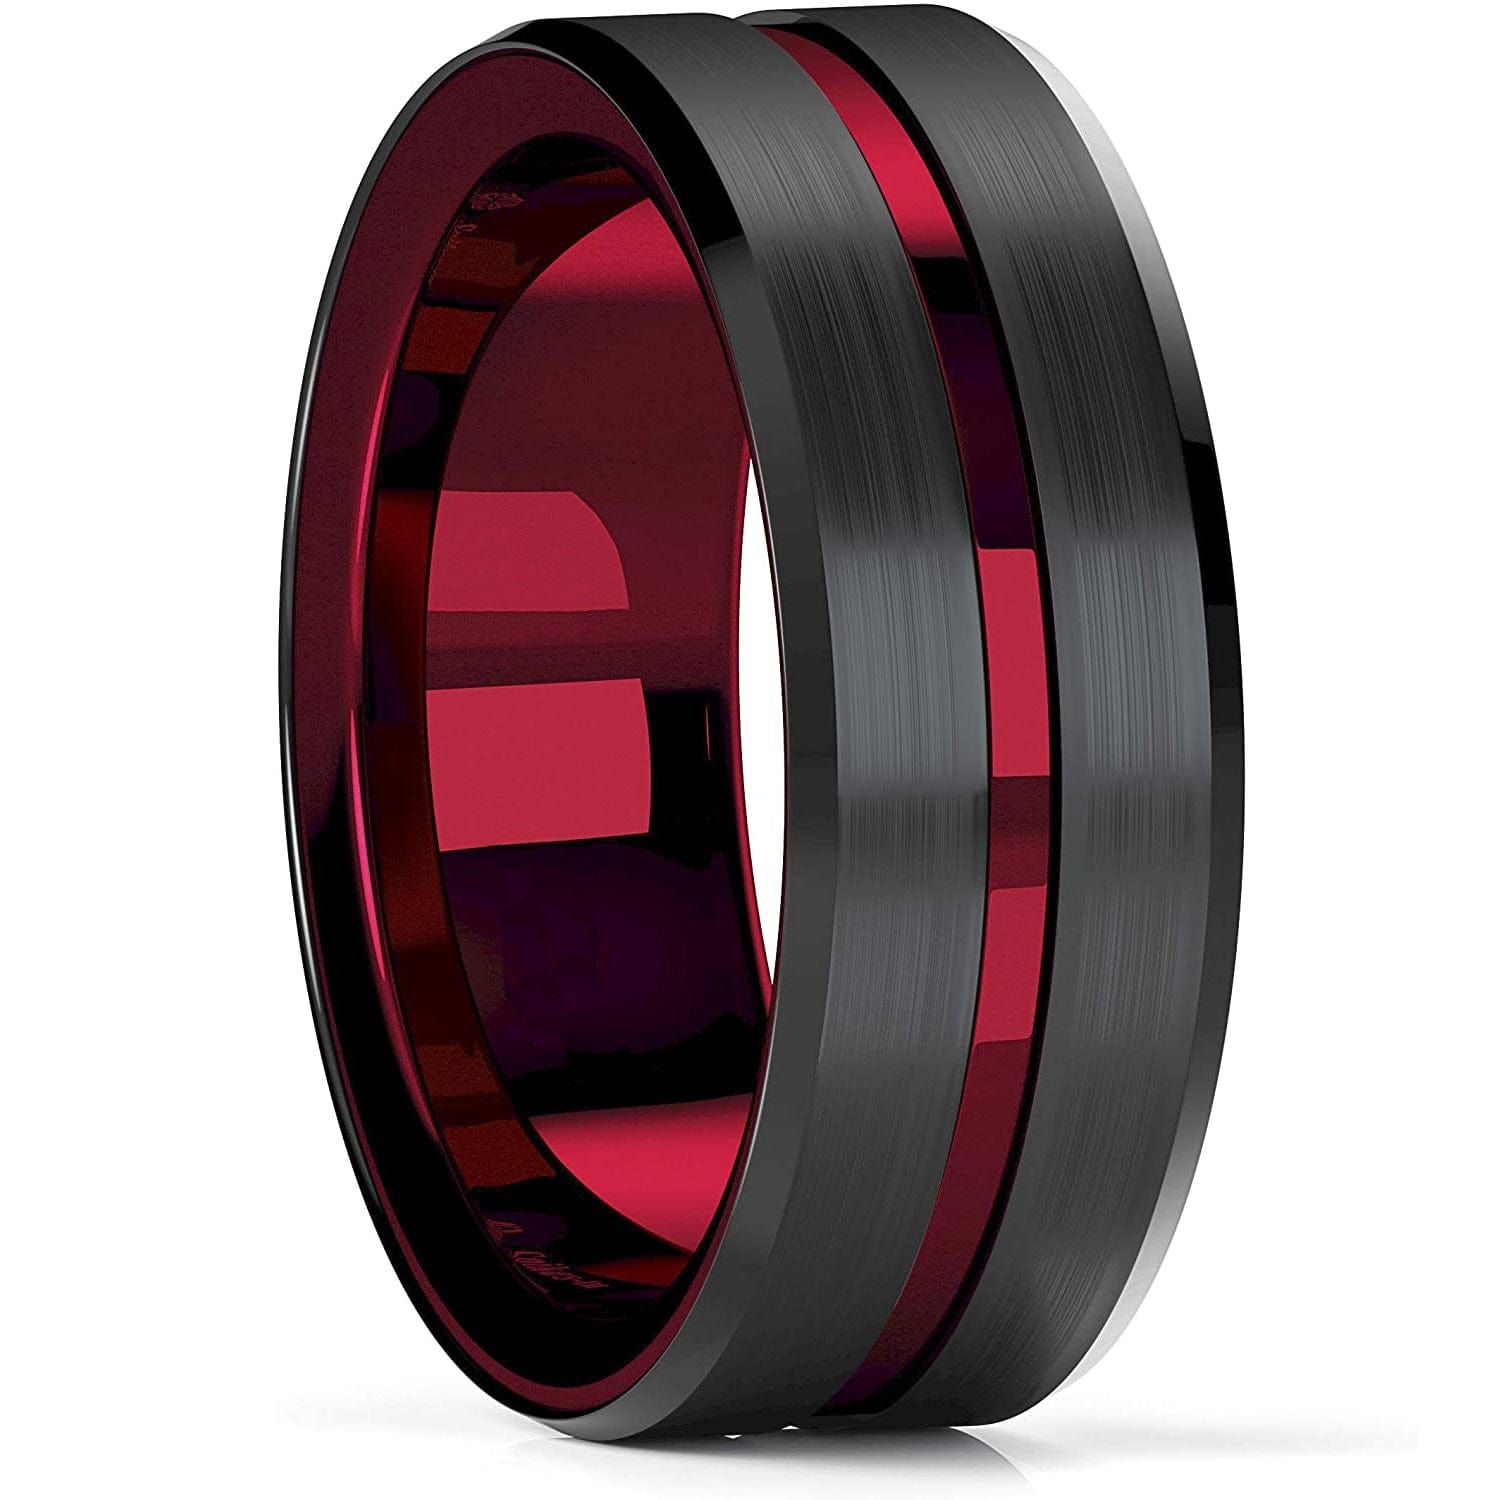 VVS Jewelry hip hop jewelry Style 1 / 9 8MM Tungsten Carbide Ring  Matte Finish Beveled Polished Edge Comfort Fit